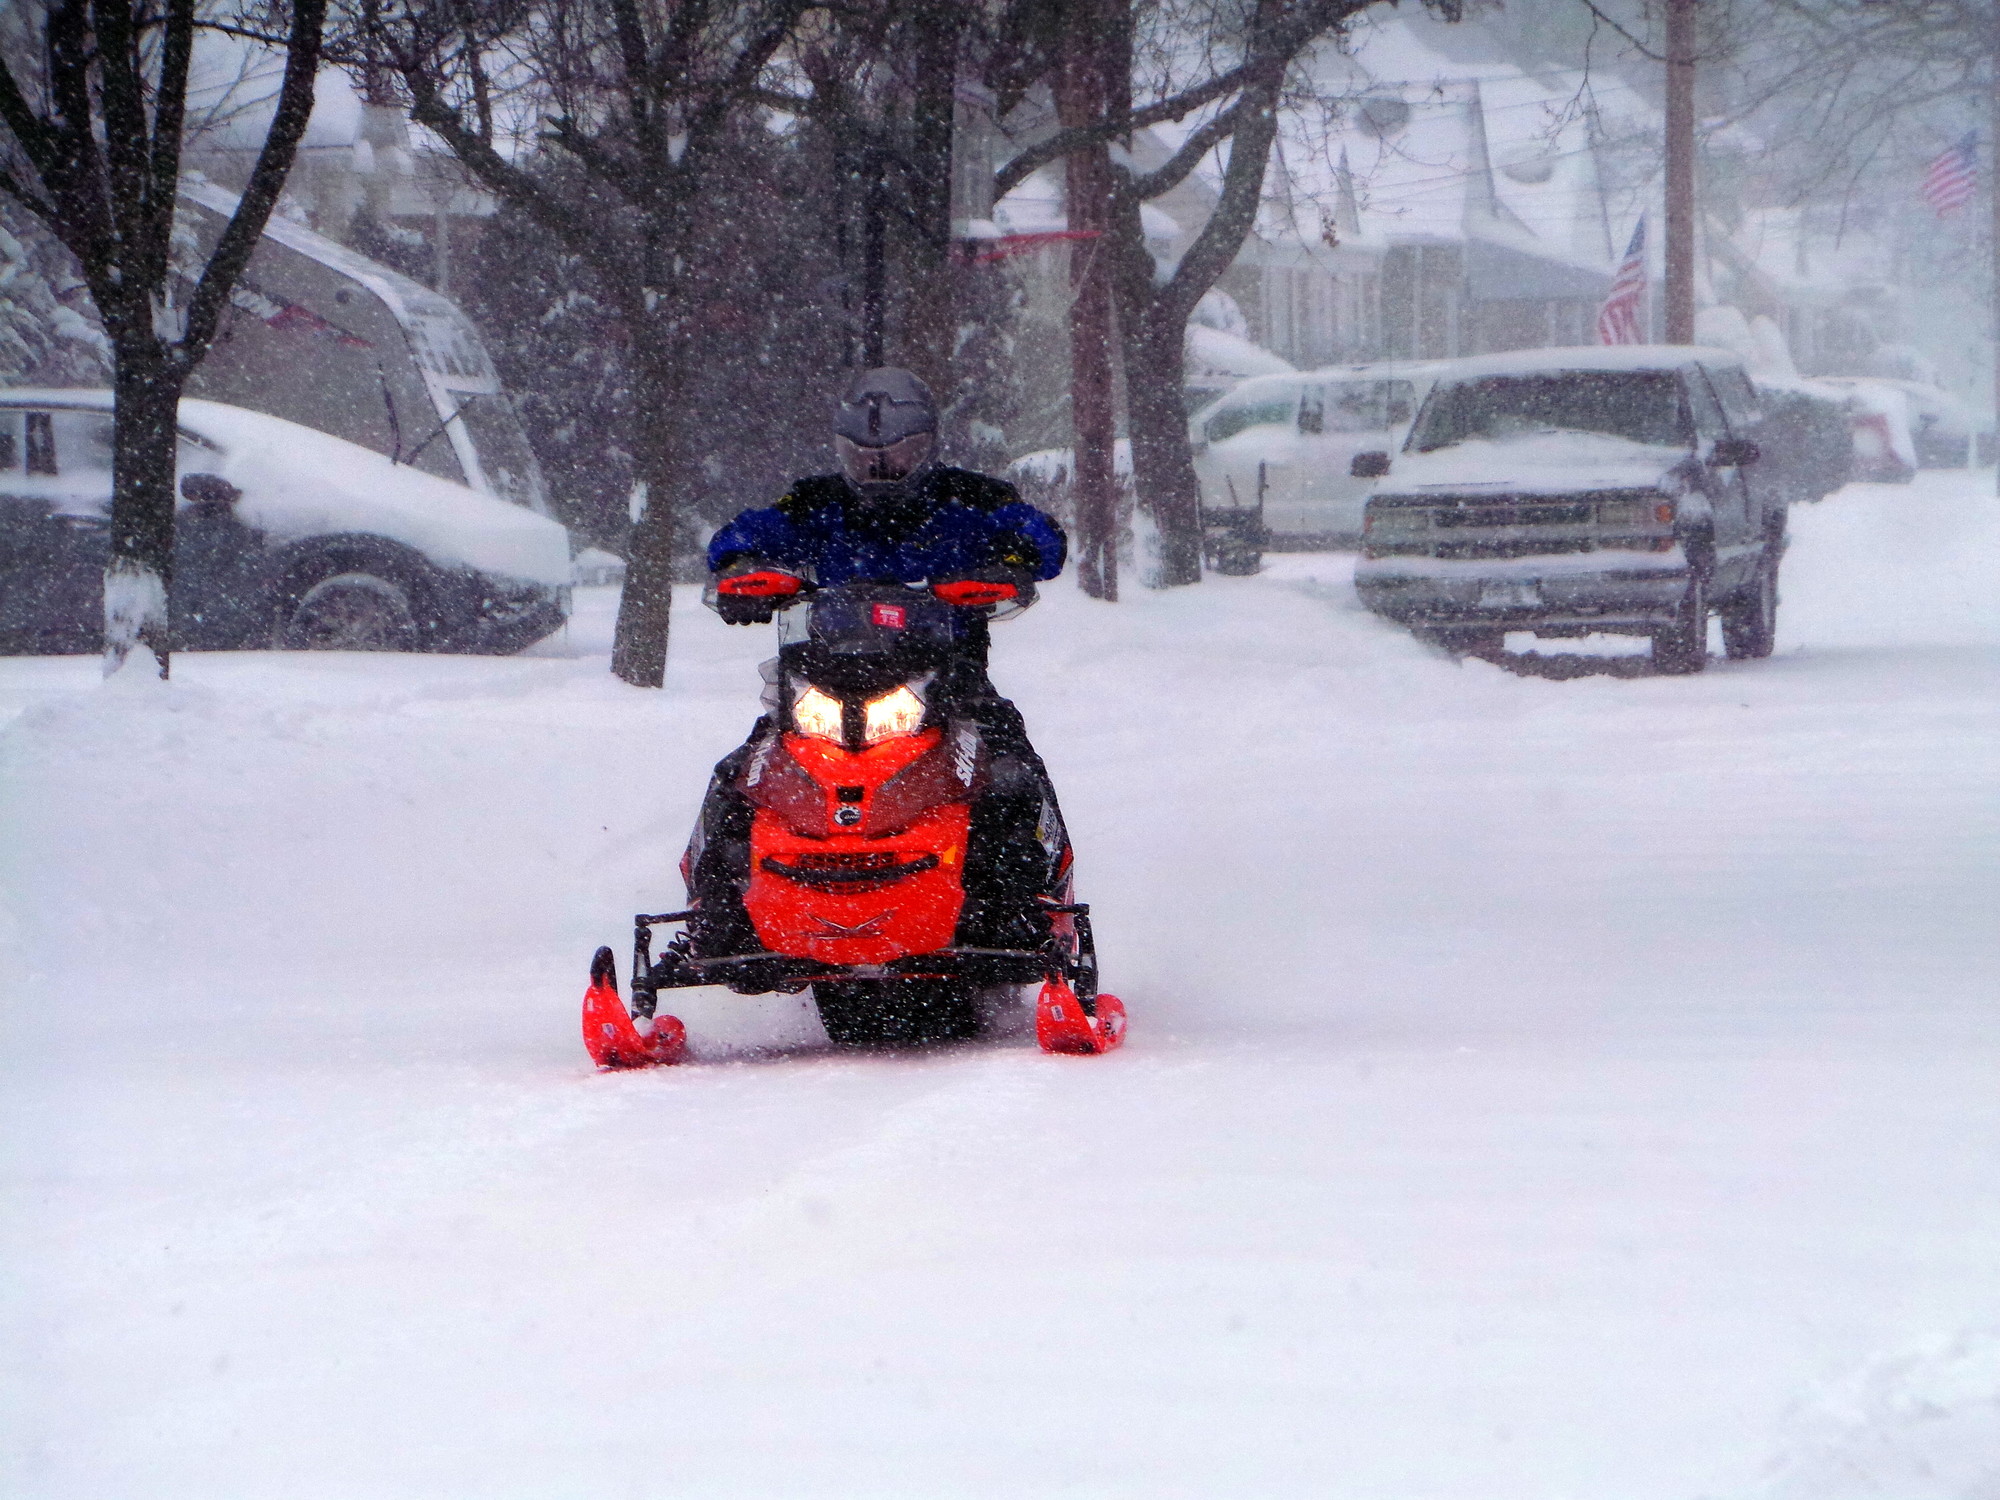 A fast-traveling snowmobile whizzed down Morris Ave. West in Malverne, taking advantage of the ideal weather conditions.